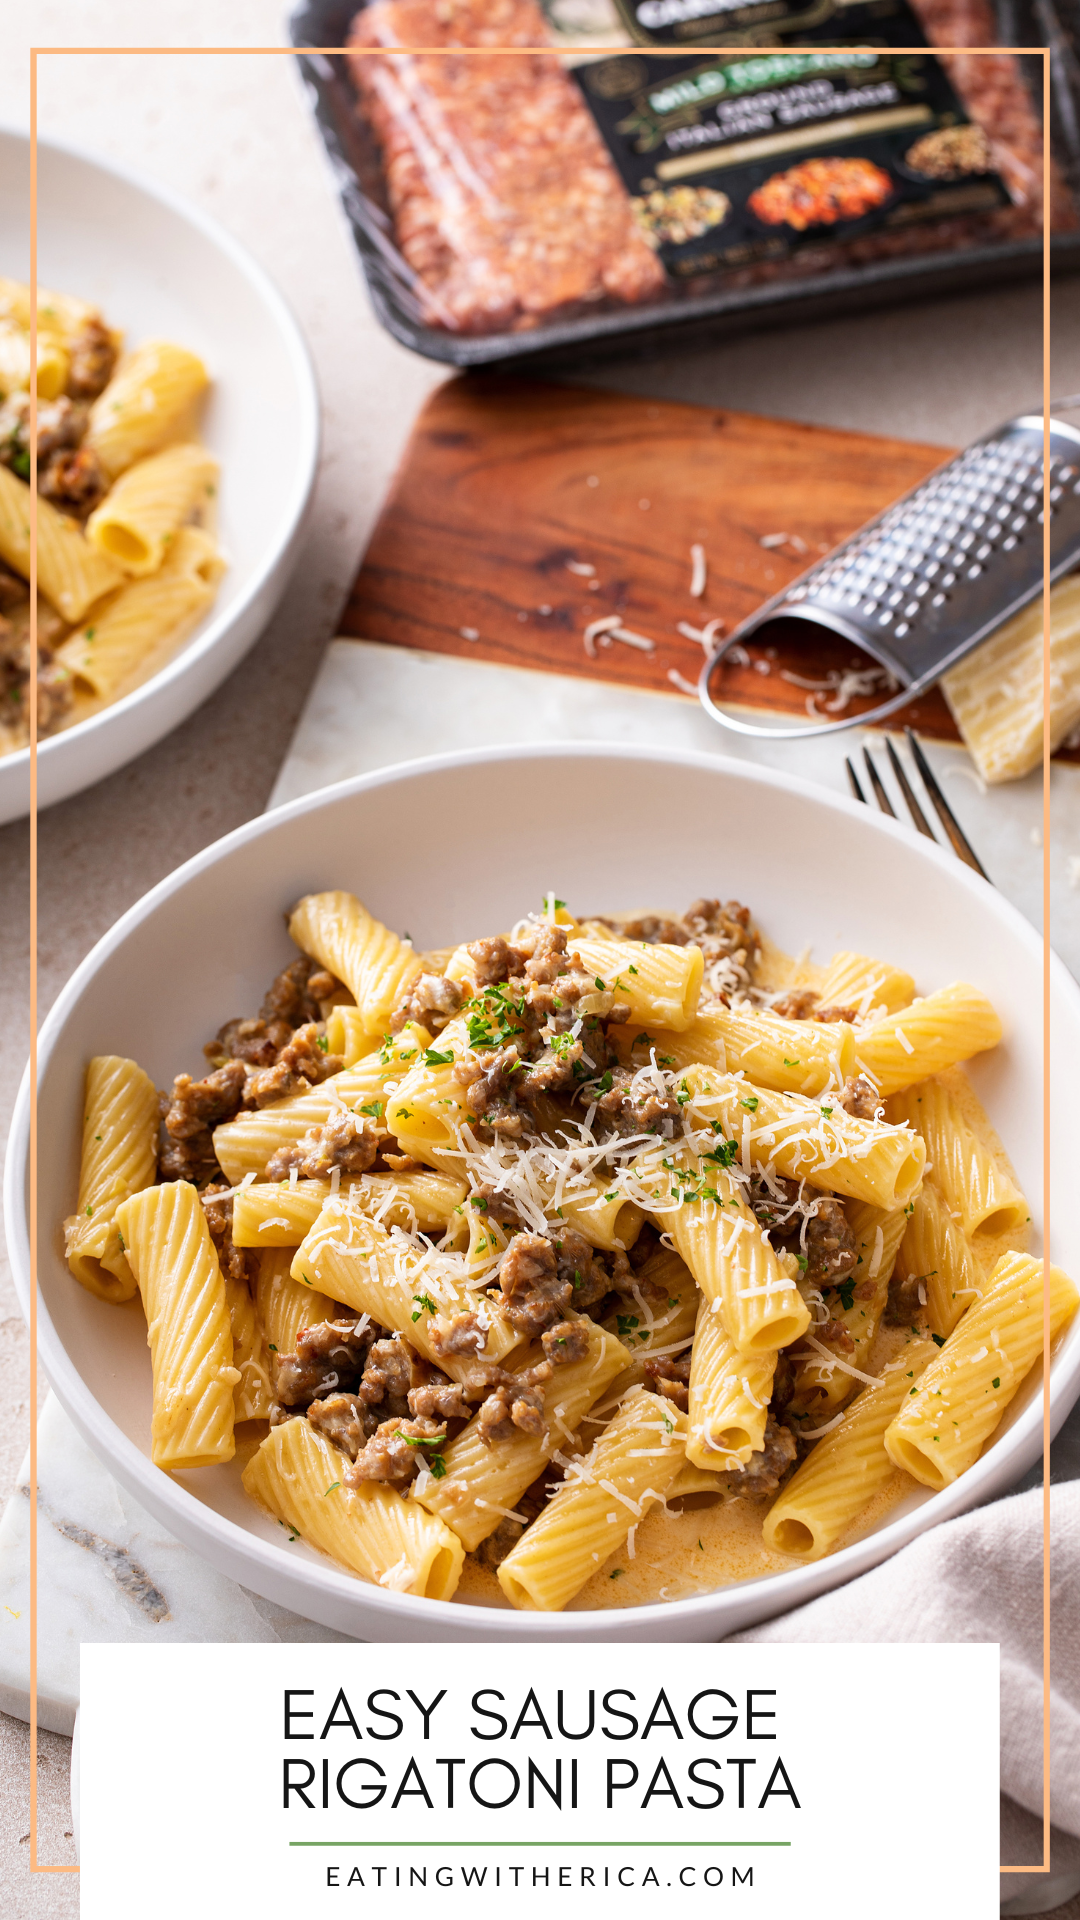 This Easy Sausage Rigatoni Pasta Recipe is definitely one that the whole family will love.